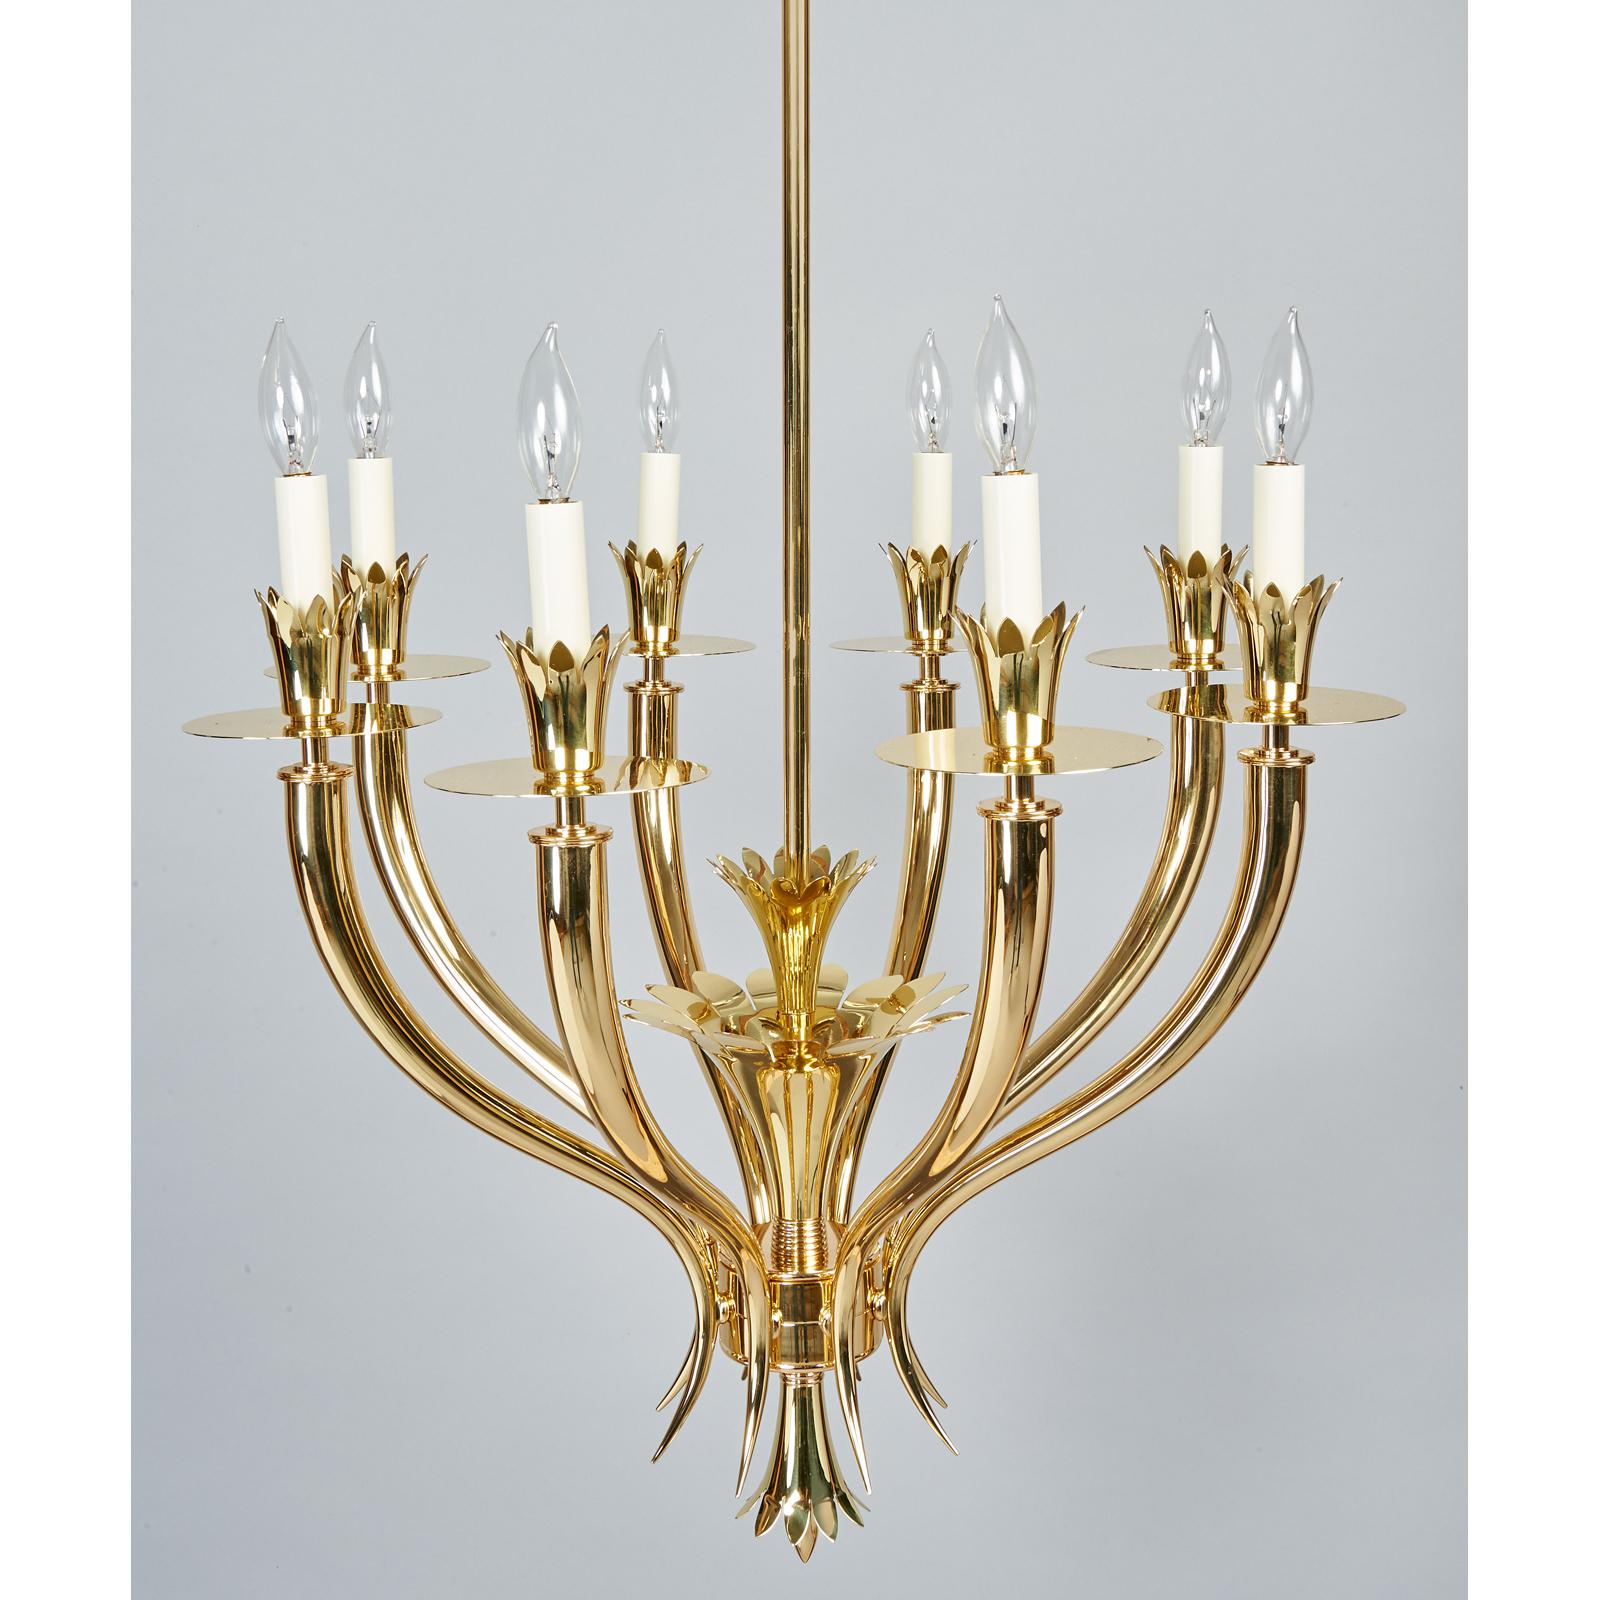 Gio Ponti: Important Geometric 8-Arm Chandelier in Polished Brass, Italy 1930s For Sale 1